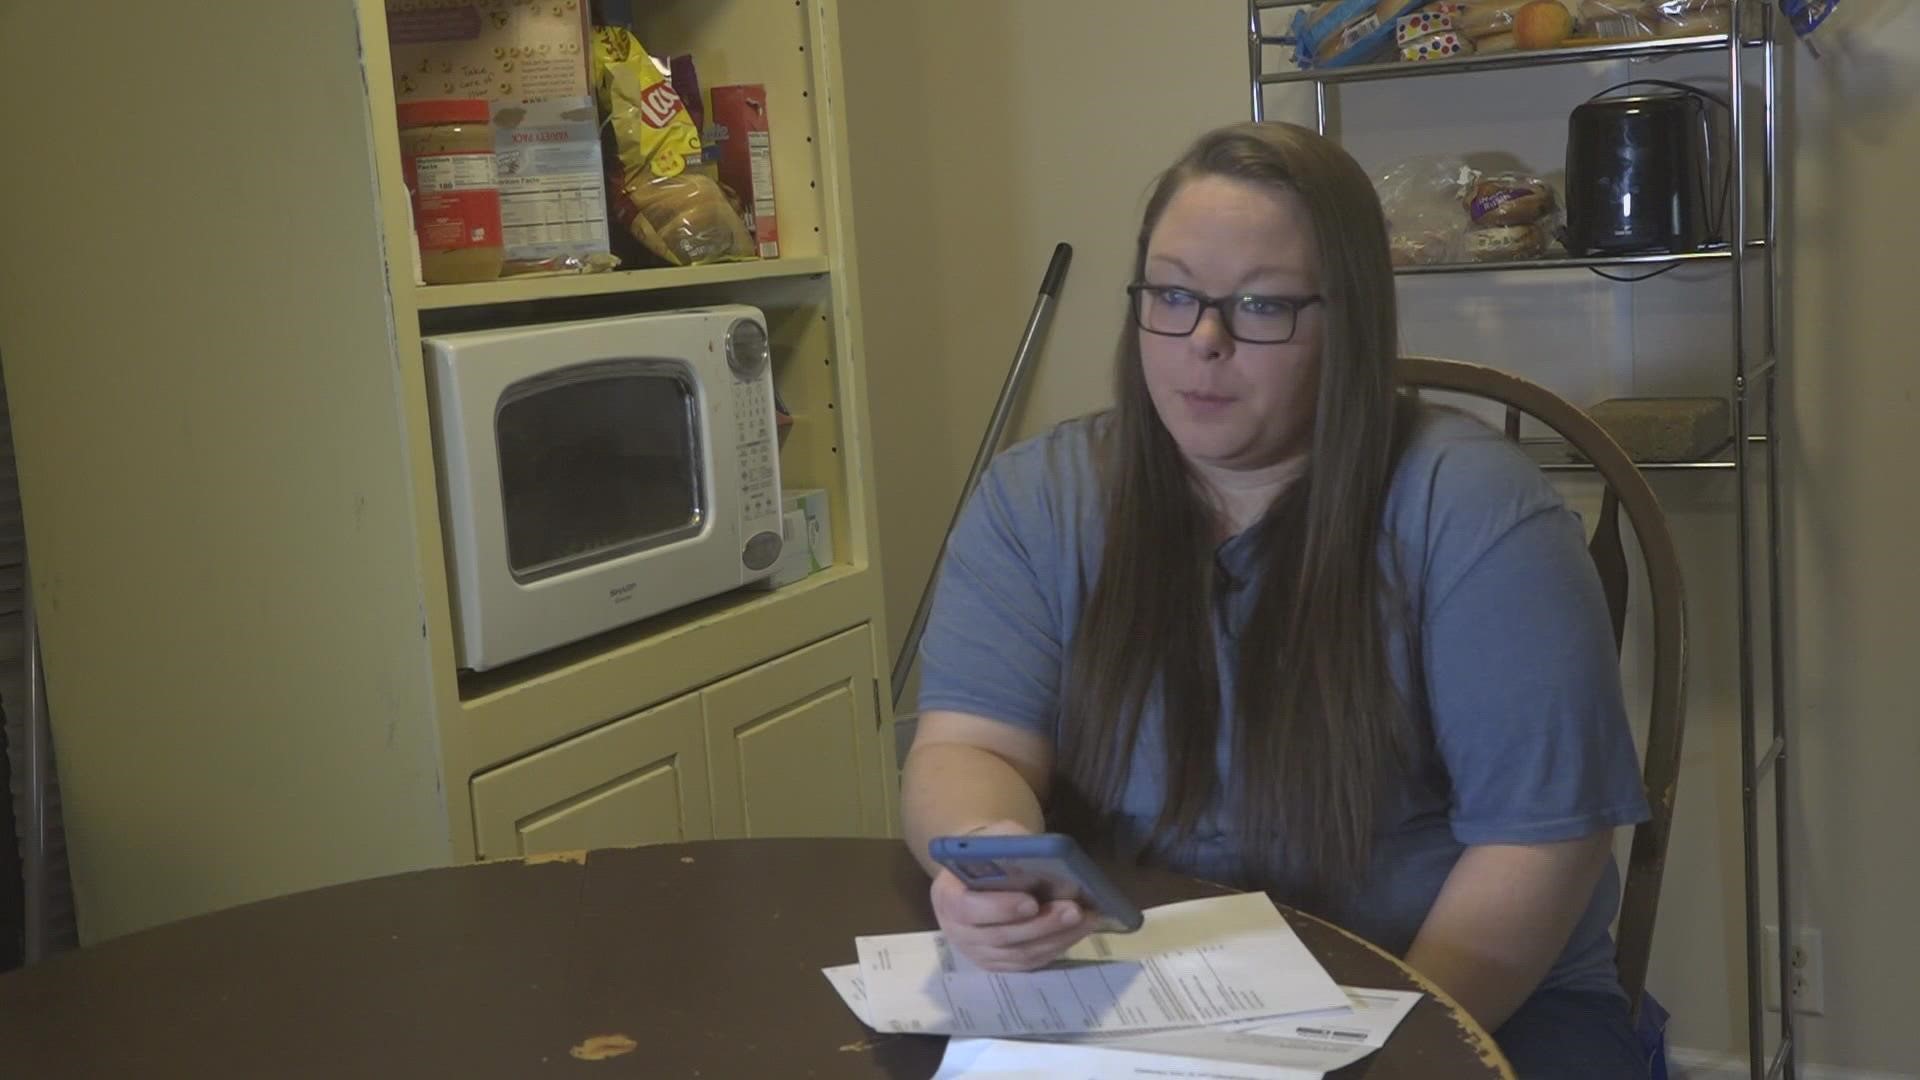 A woman says her phone said "live screen view." Then she had credit cards opened in her name and many other kinds of loans.